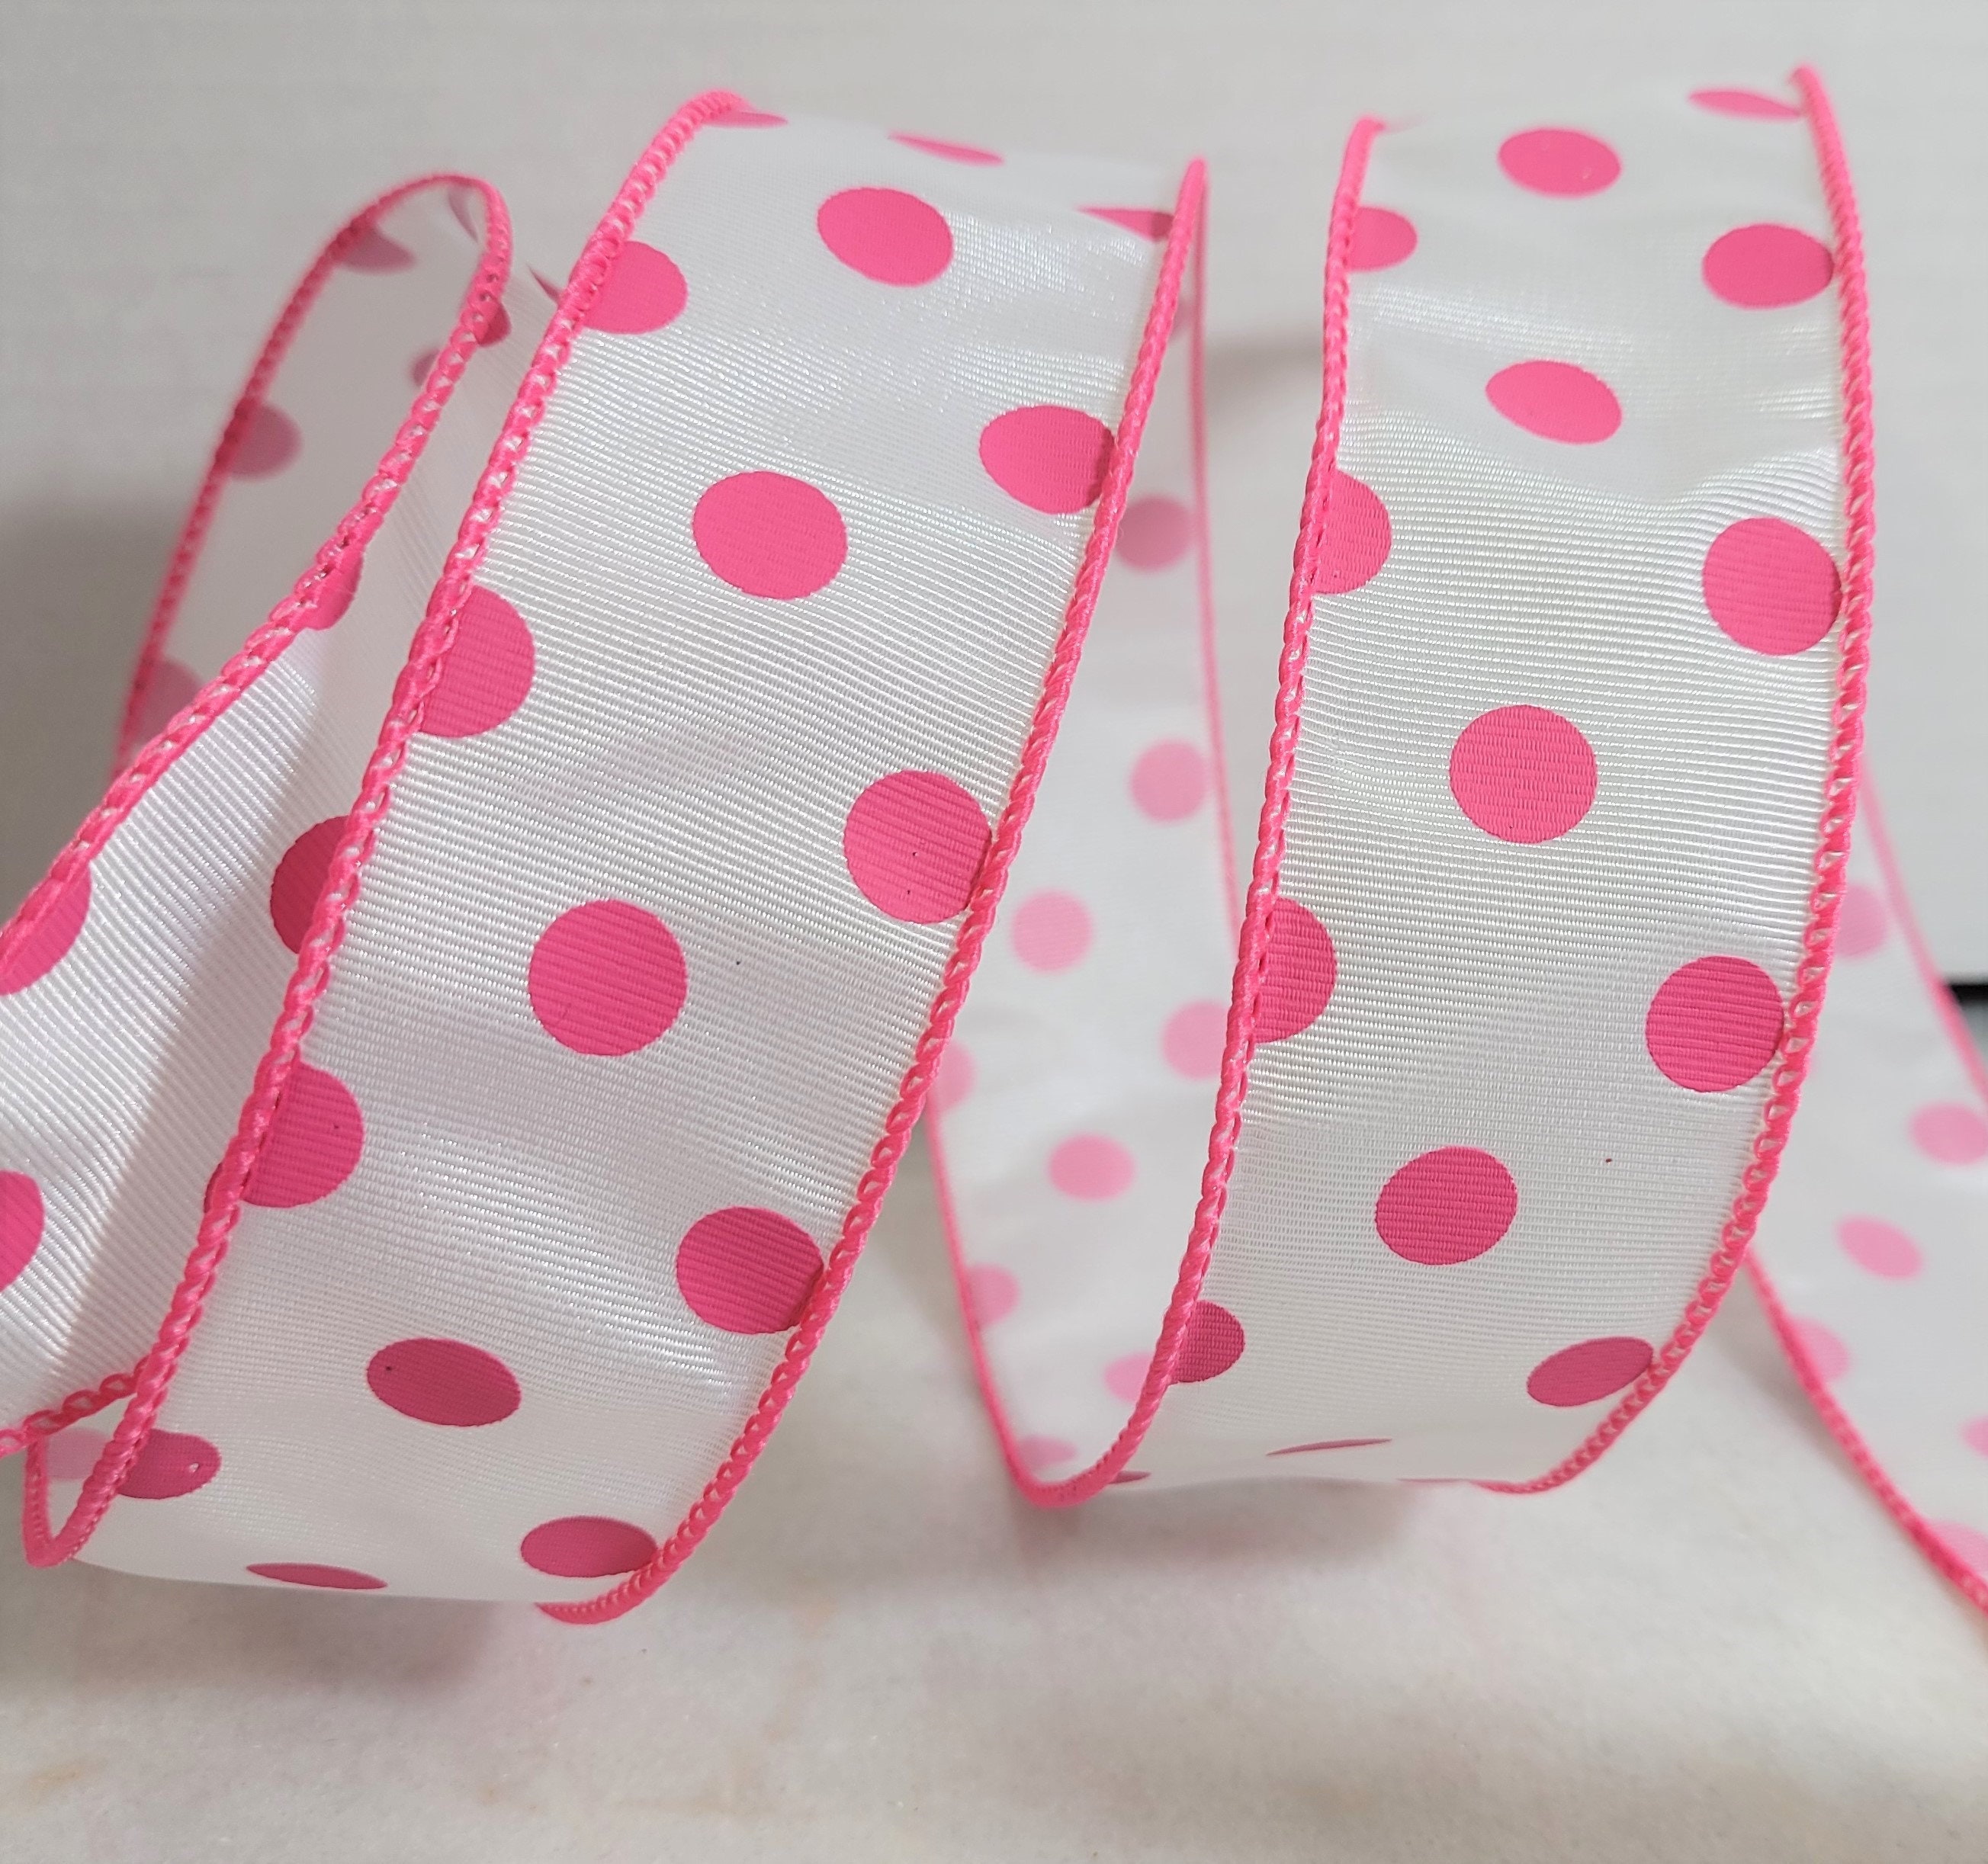 Satin Polka Dot Ribbon Wired Pink with White Dots ( W: 1 - 1/2 inch | L: 10 Yards )